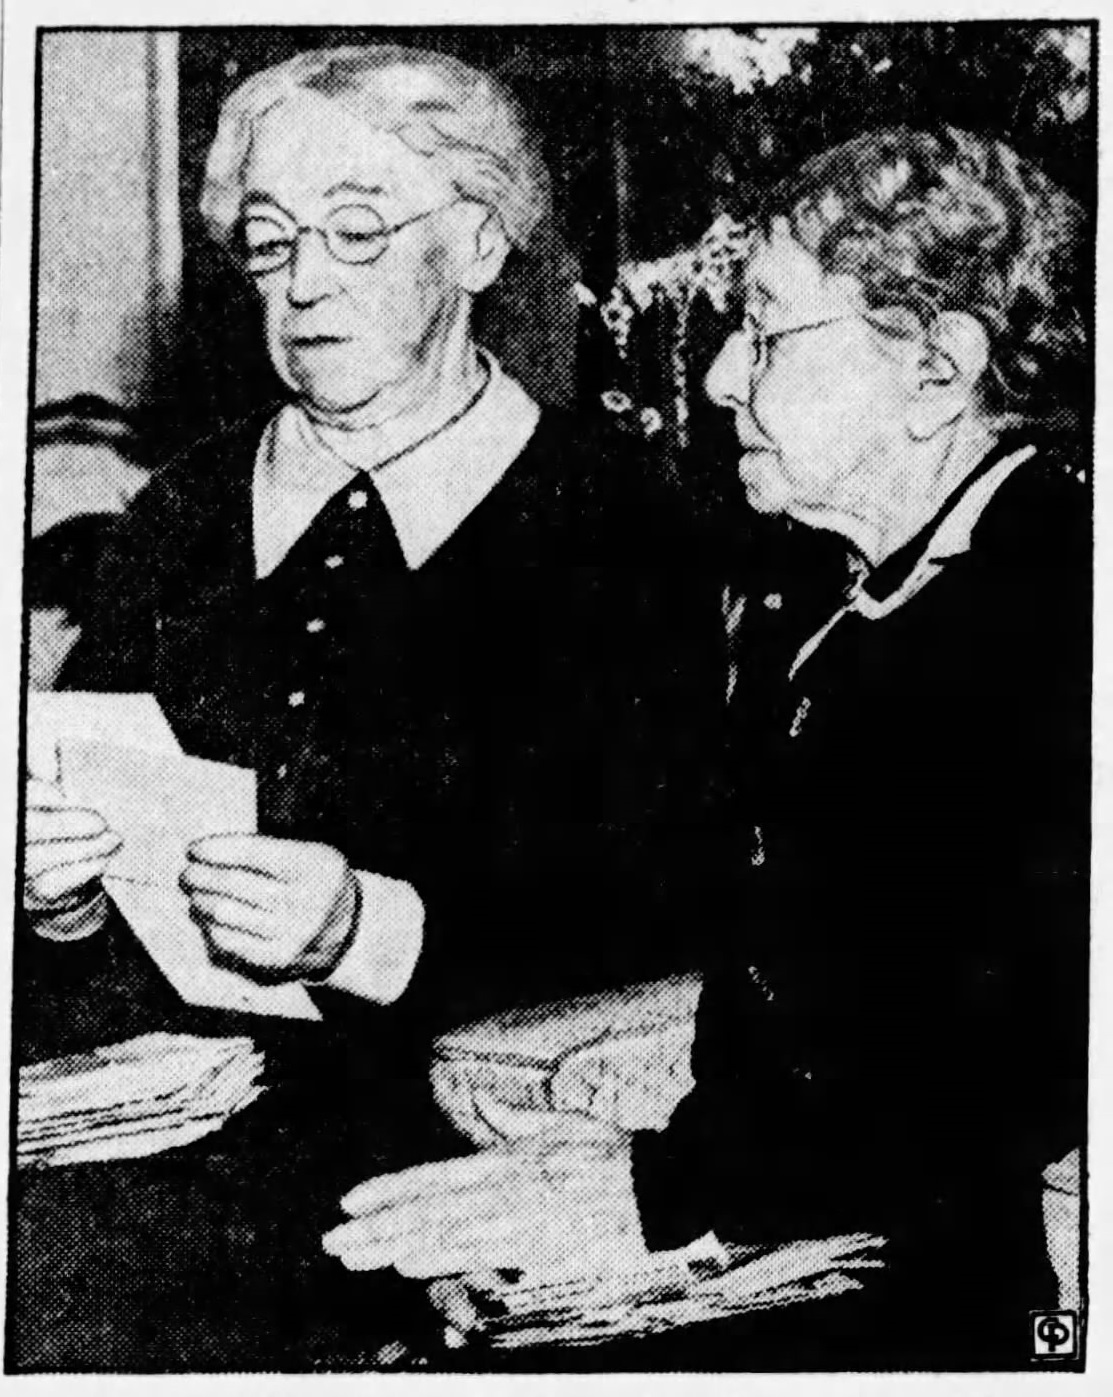 Wheeler (right) on her 106th birthday in 1939, along with her 80-year-old daughter Annette (Source: News-Journal)